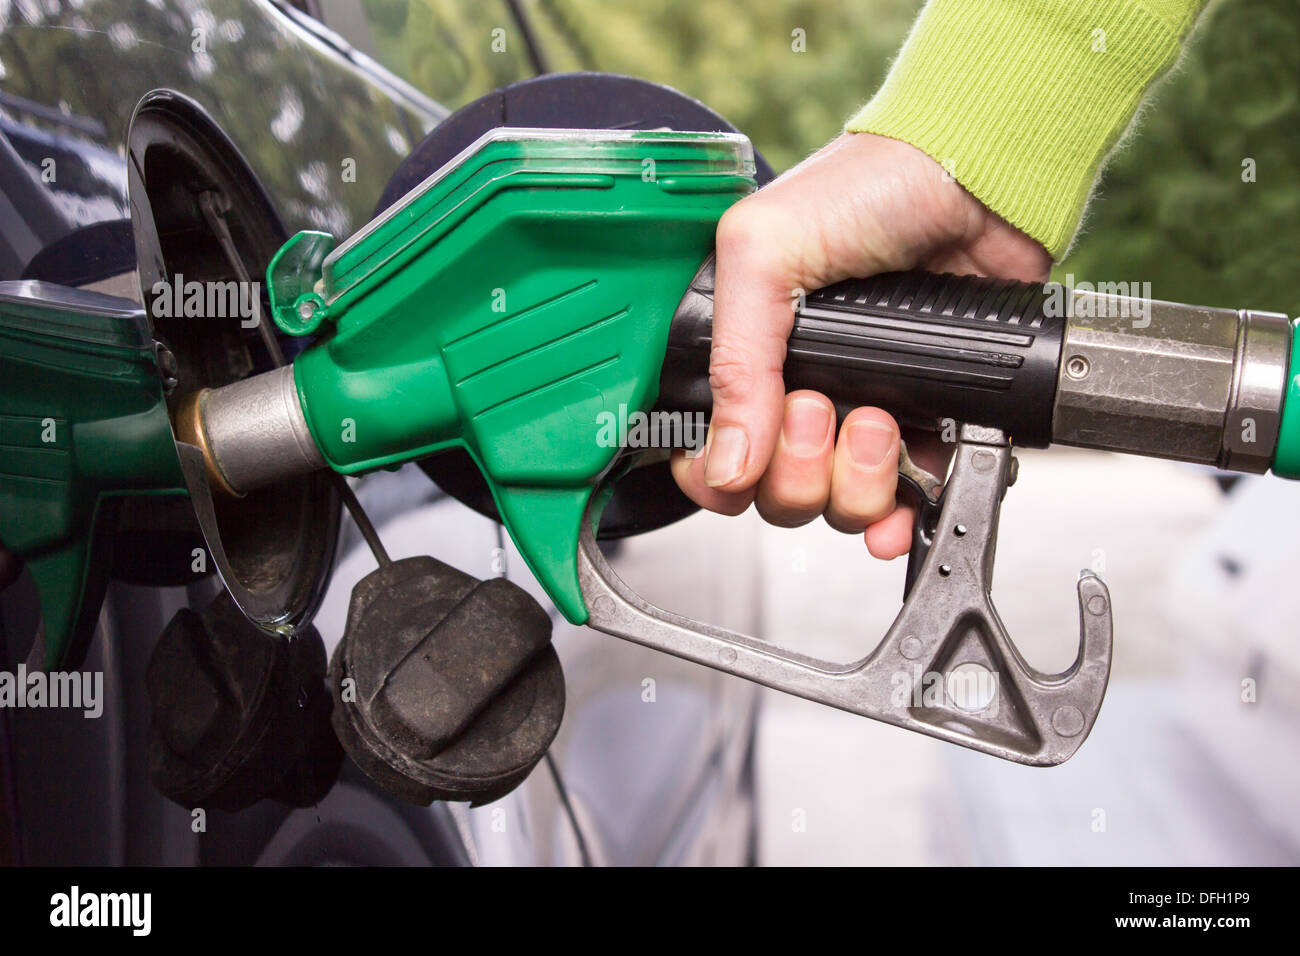 Female hand with pistol grip filling car tank with gasoline Stock Photo